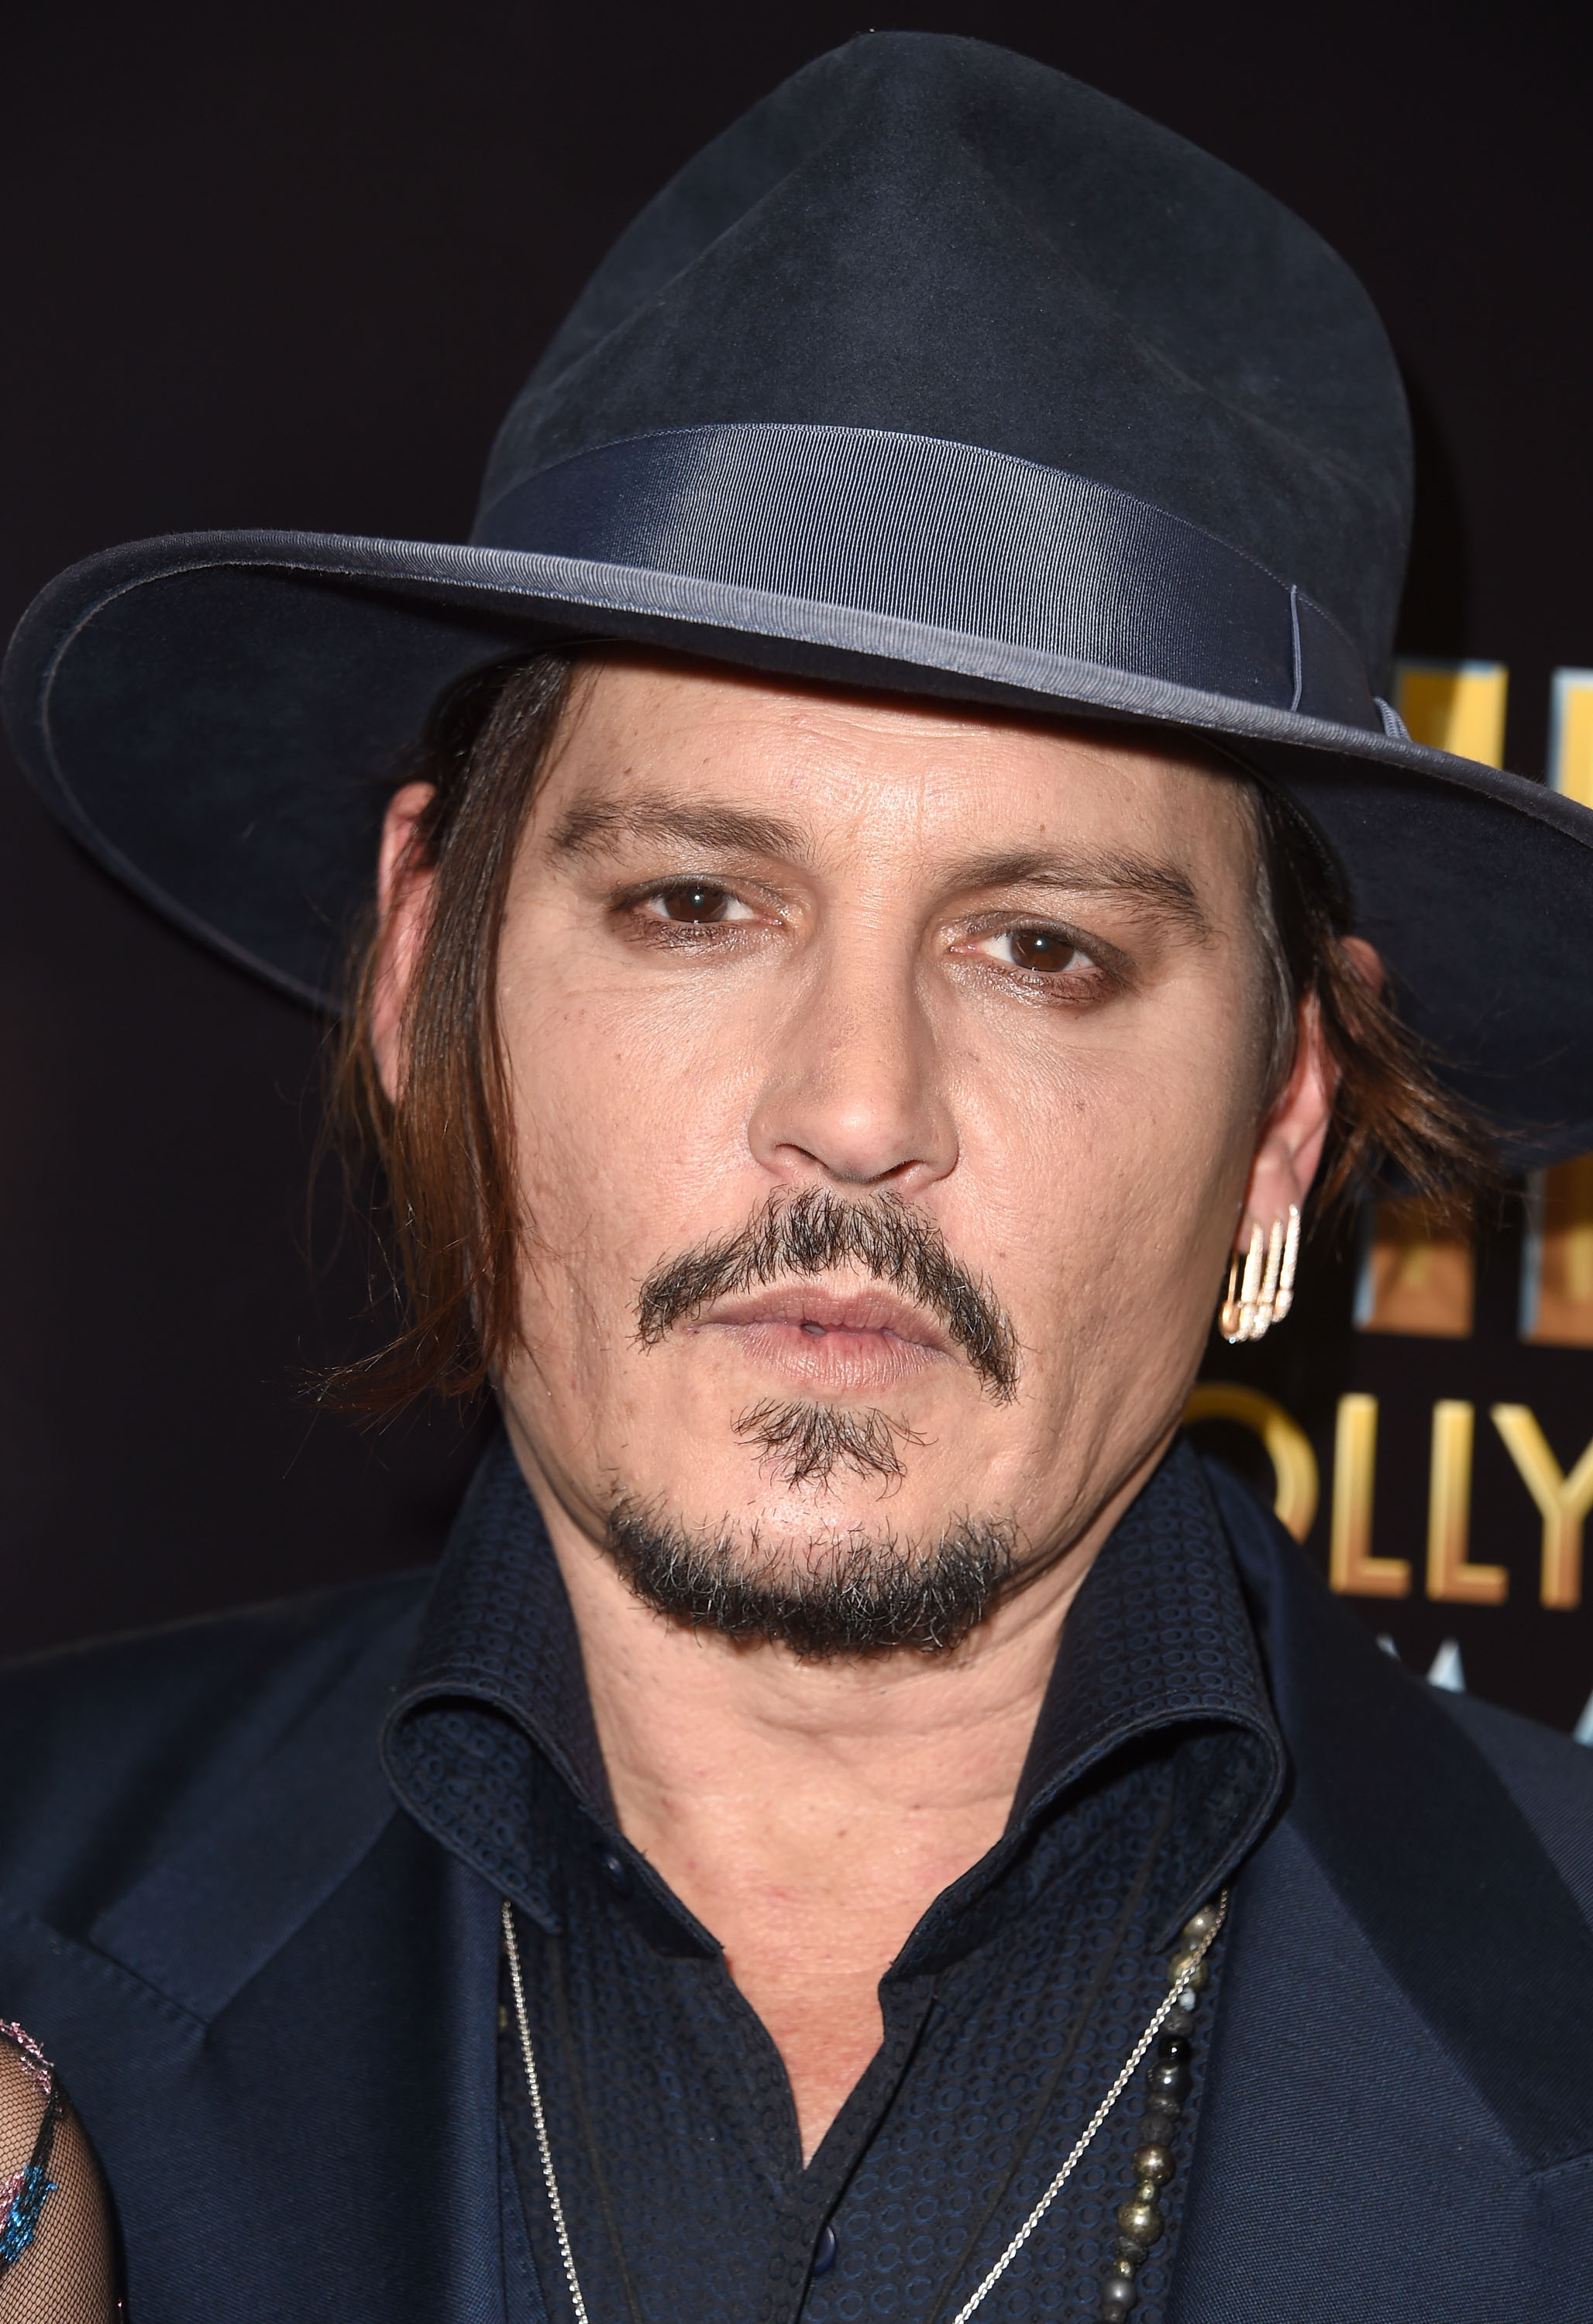 Johnny Depp at the 19th Annual Hollywood Film Awards in Beverly Hills on Nov. 1, 2015. (Steve Granitz—WireImage/Getty Images)